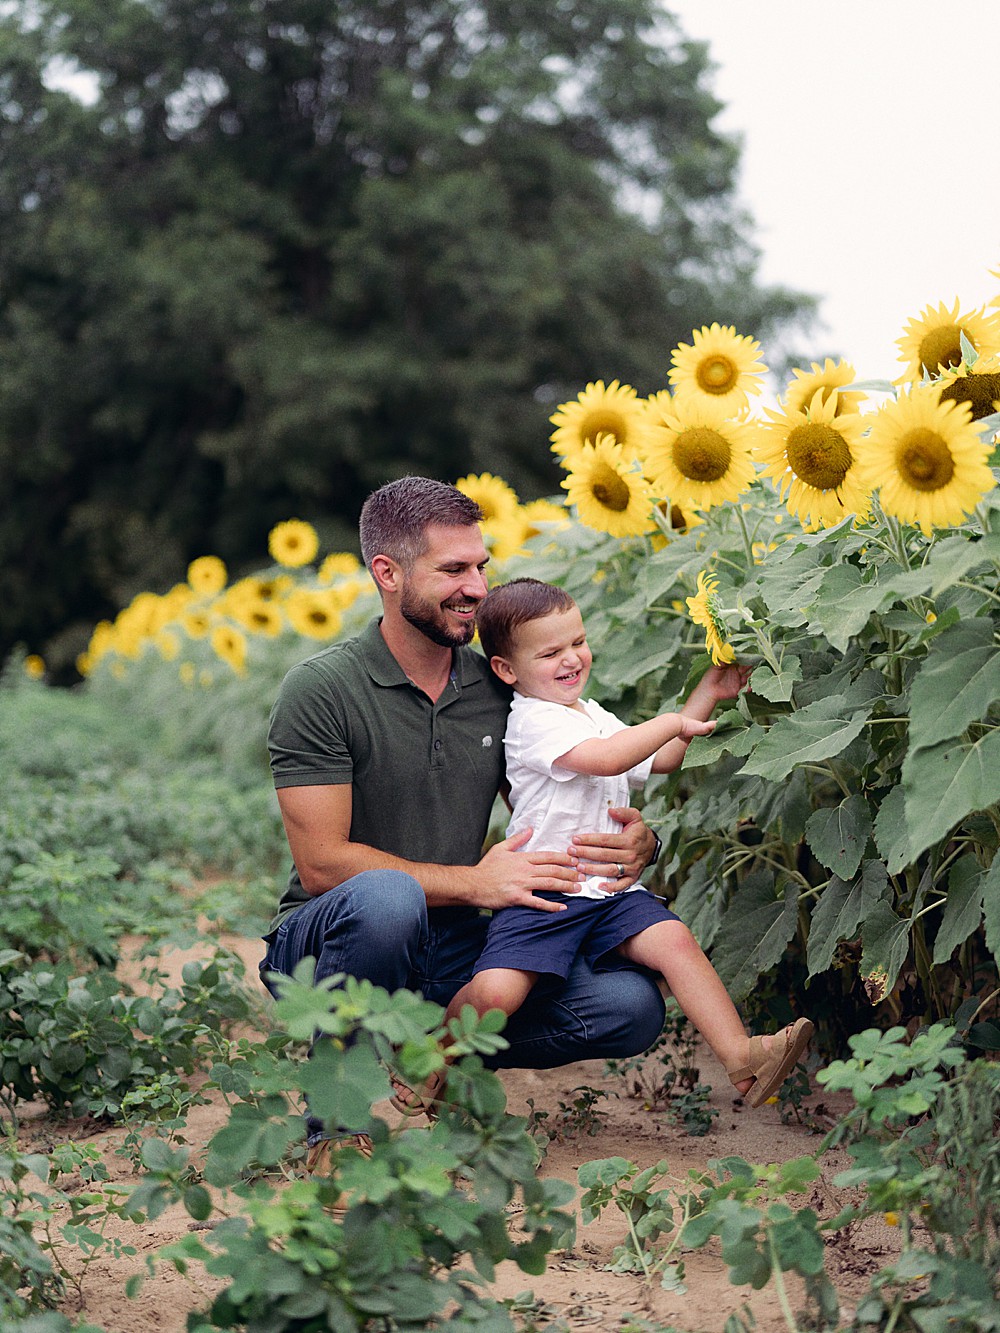 Father and son playing with a big sunflower